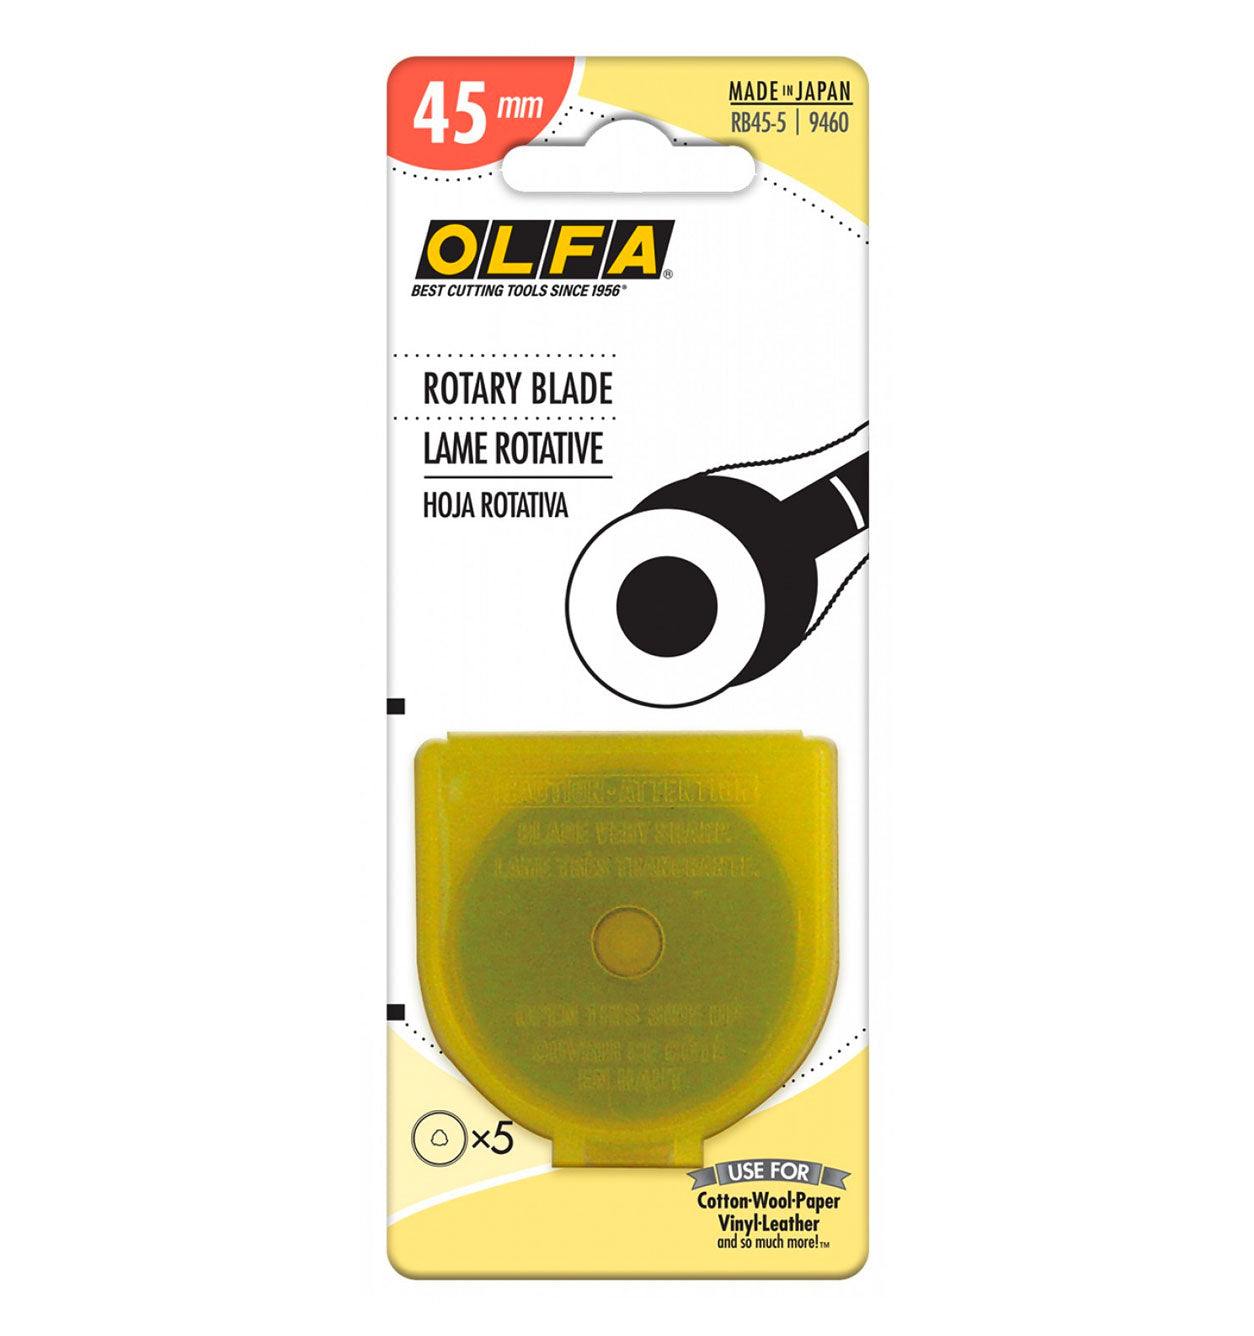 Olfa Rotary Blade Refills, 45mm, Silver - 5 pack